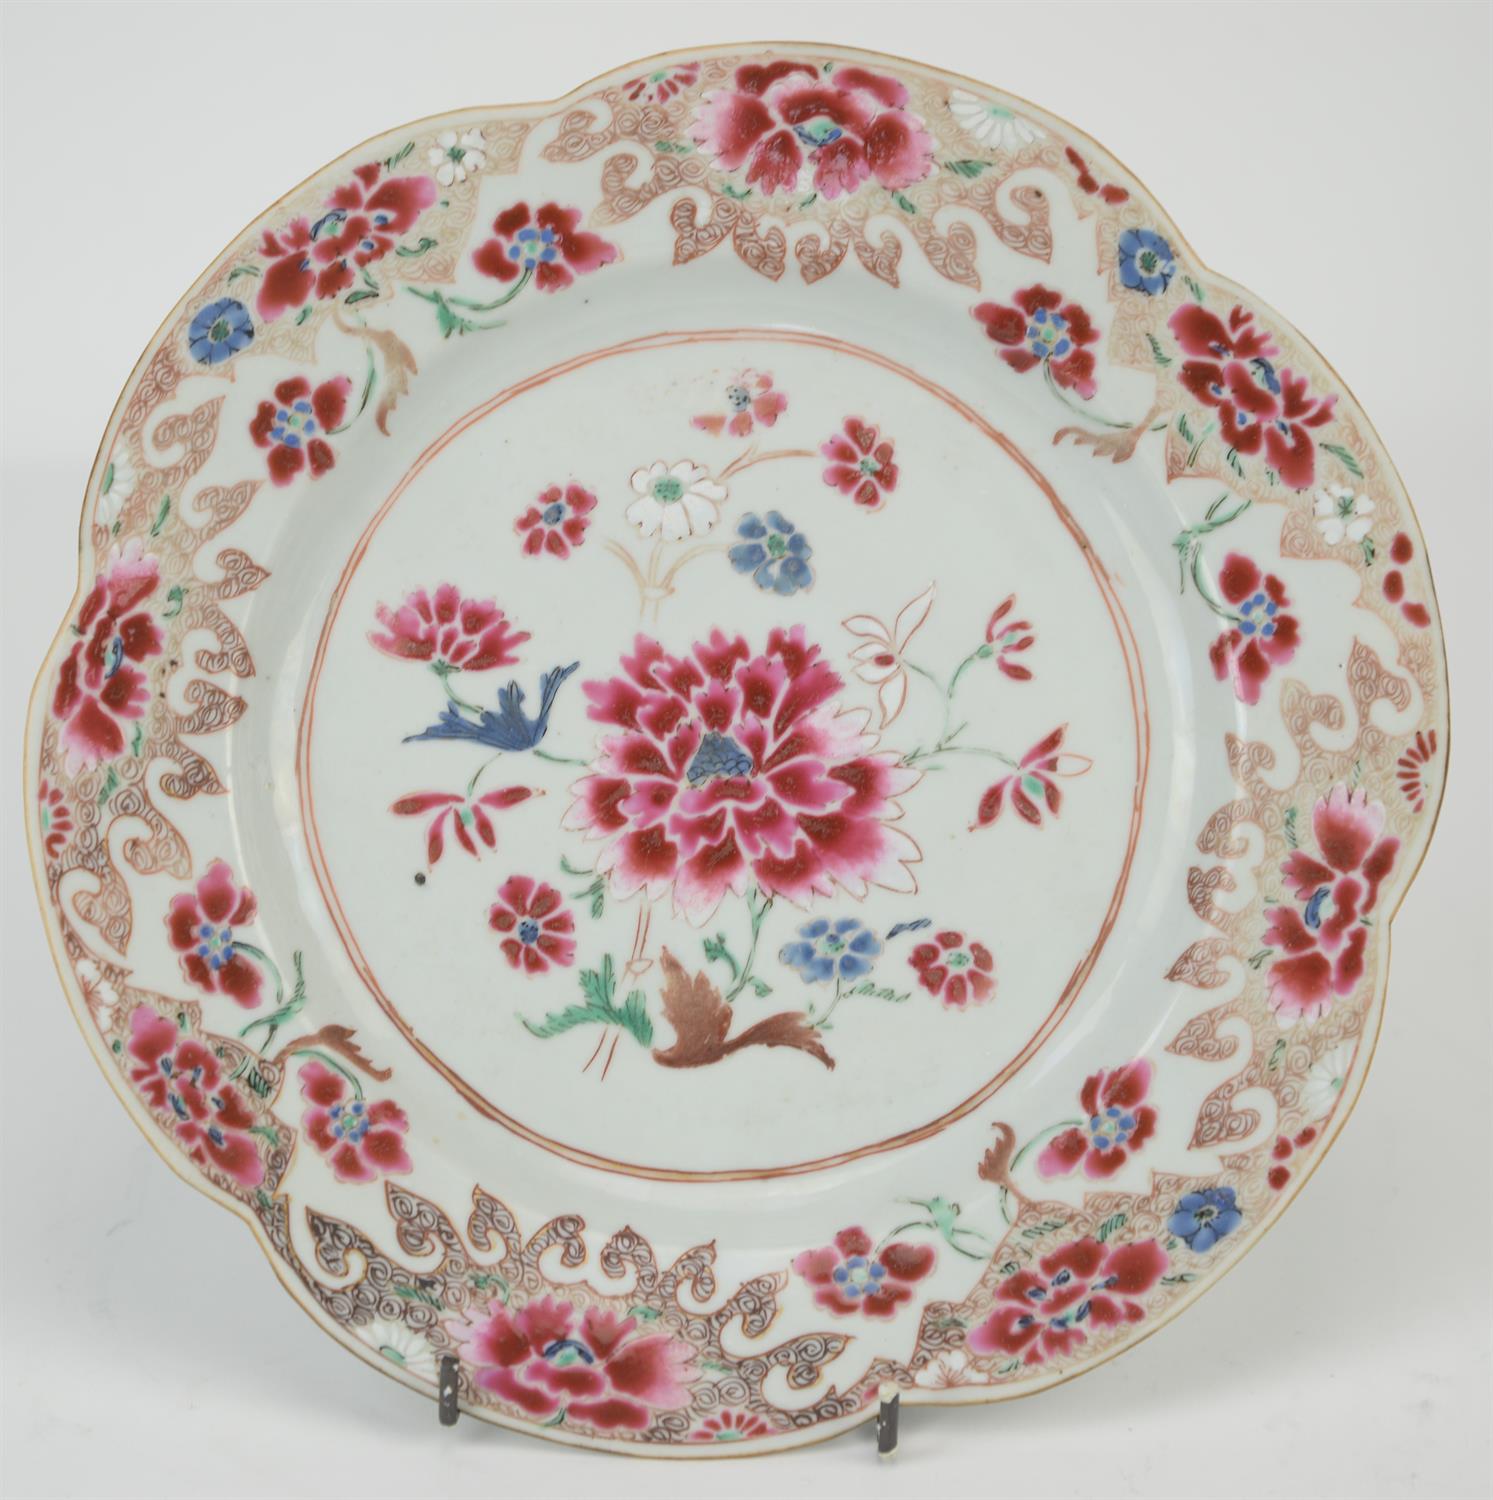 Eight famille rose dishes; each one decorated with floral designs and about 22.5 cm diameter, - Image 24 of 28